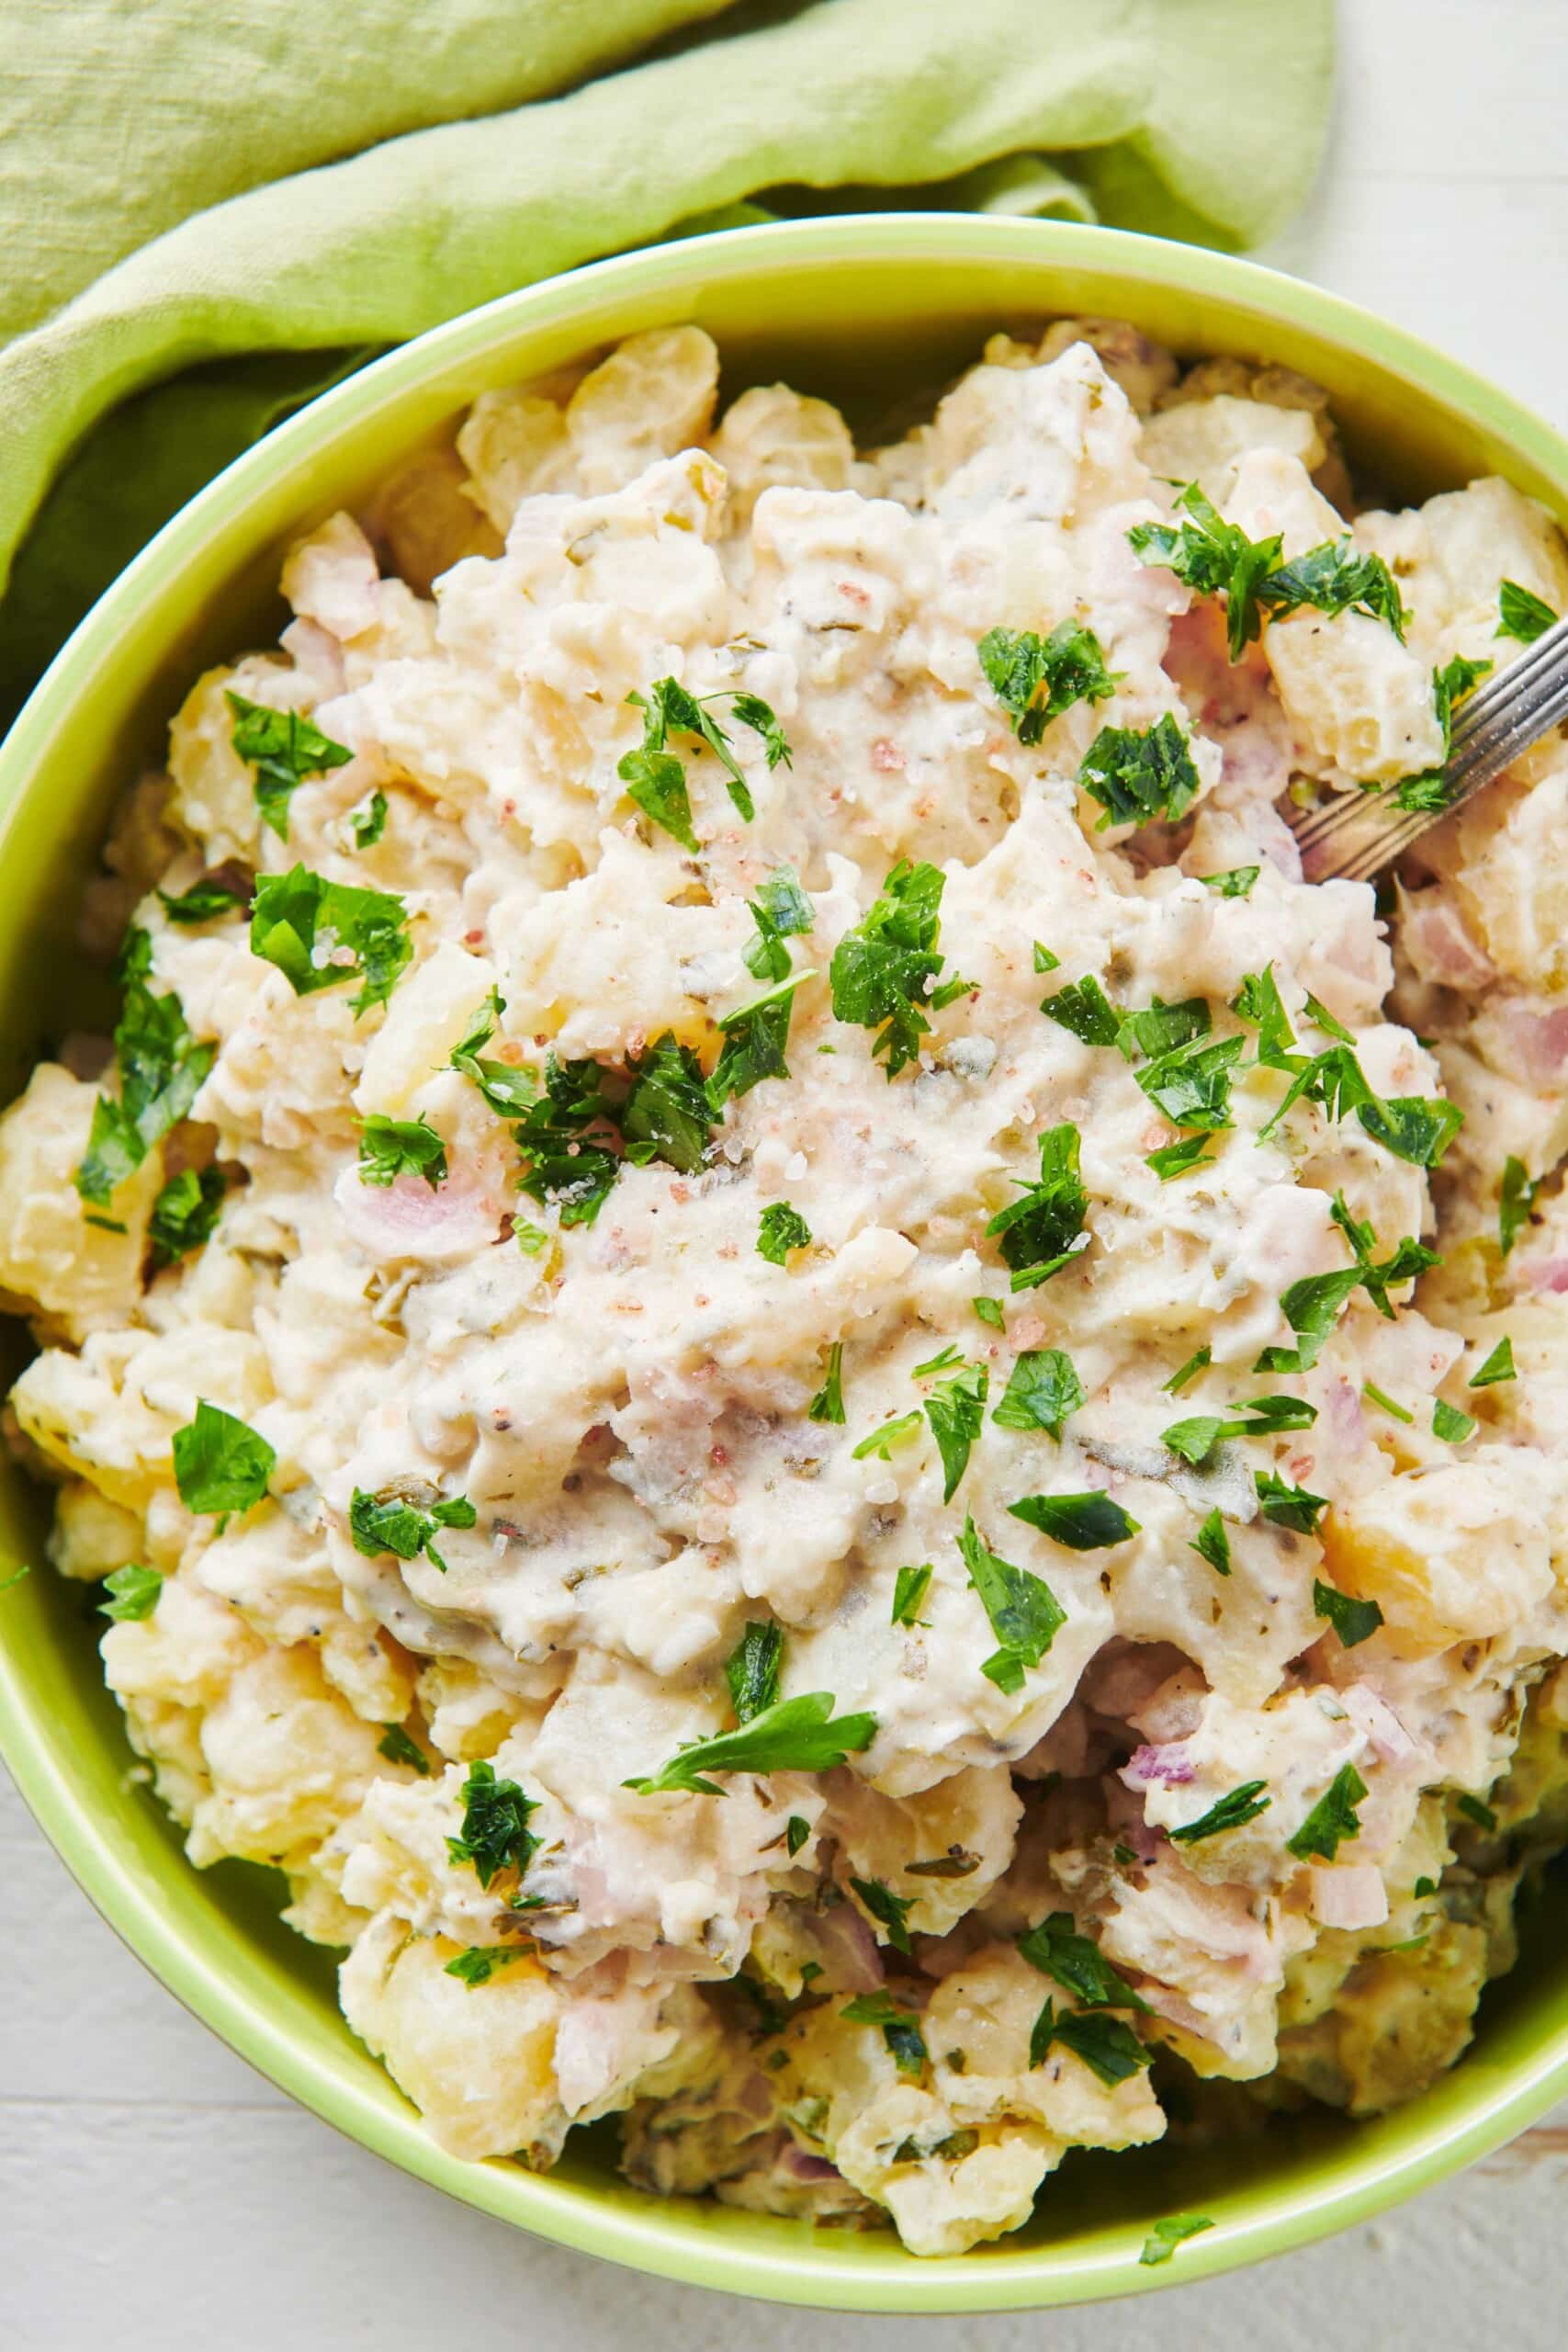 Potato Salad topped with chopped herbs in a bowl.